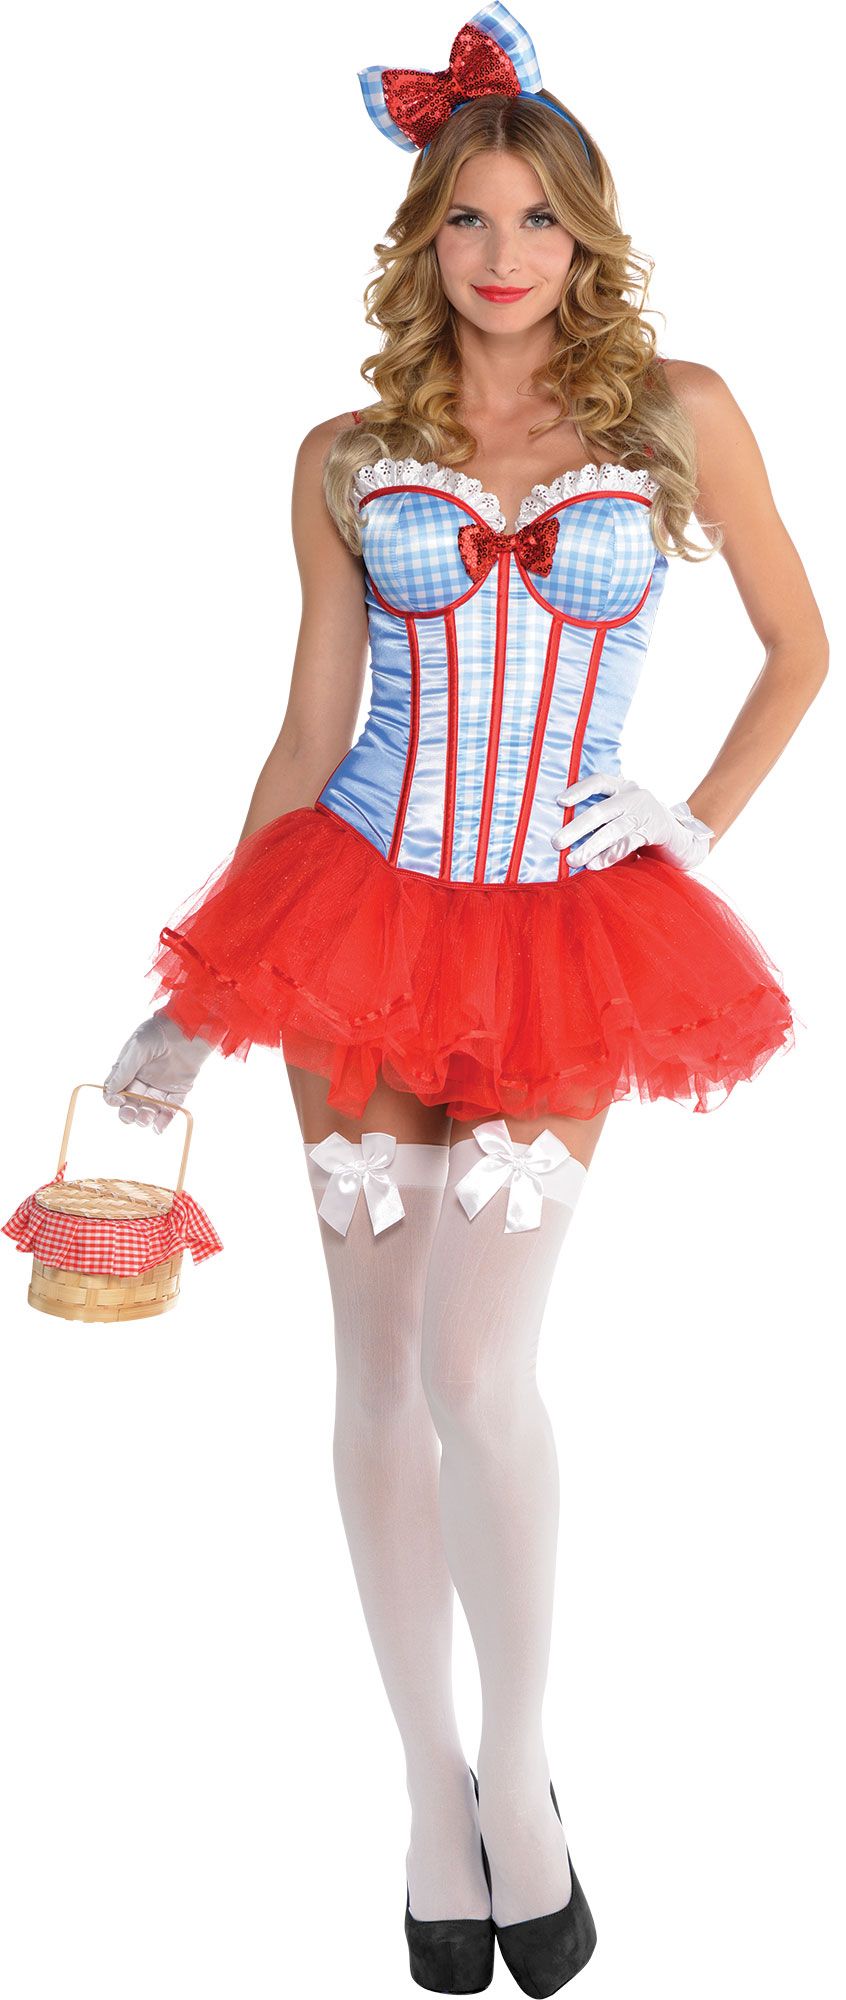 Create Your Own Womens Kansas Cutie Costume Accessories Party City 9763